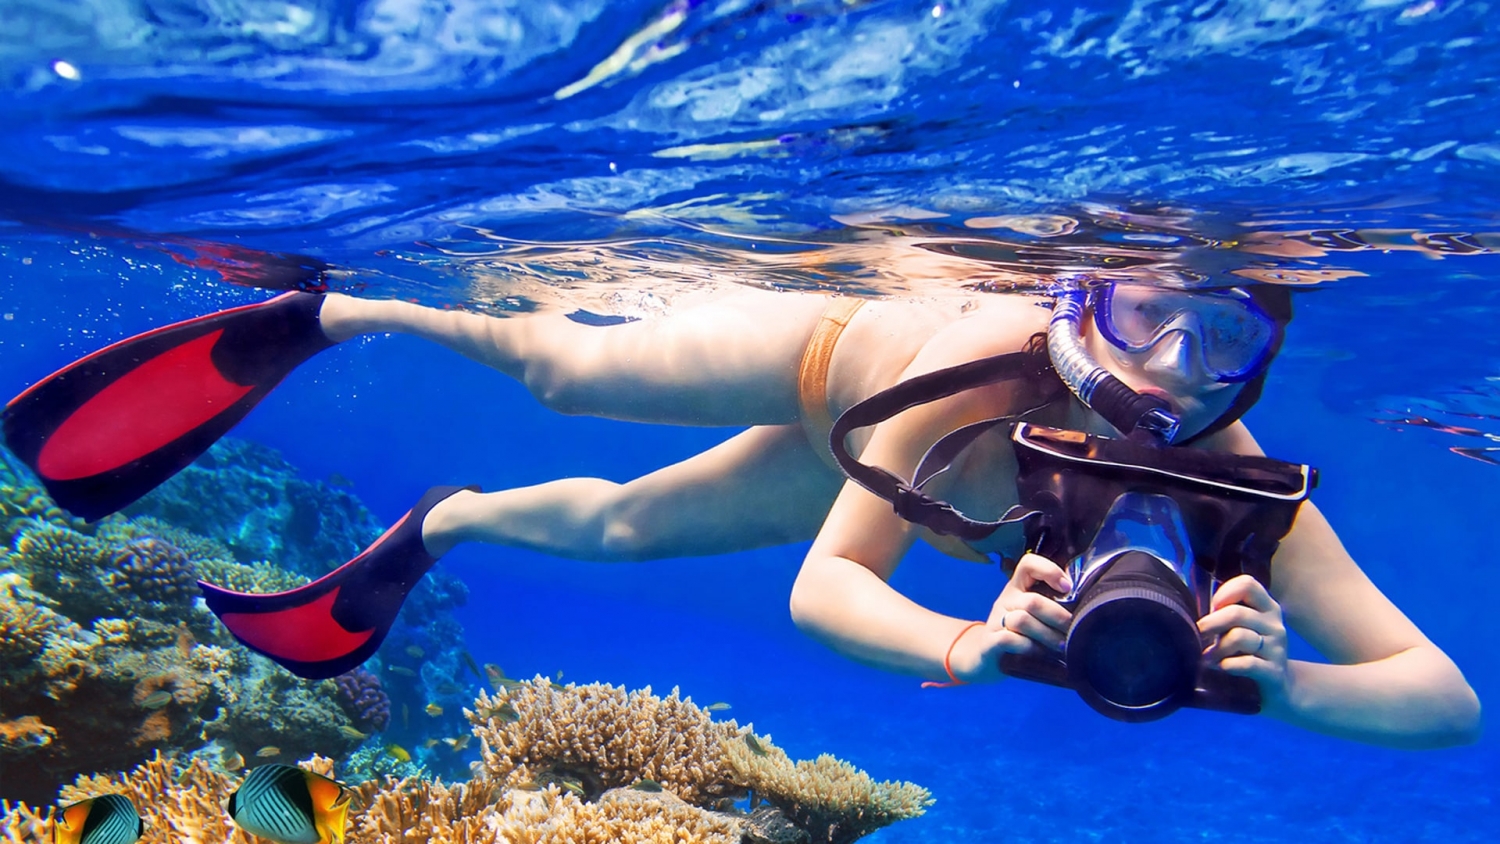 Apnea Photo And Video Protec International Professional Technical And Recreational Diving